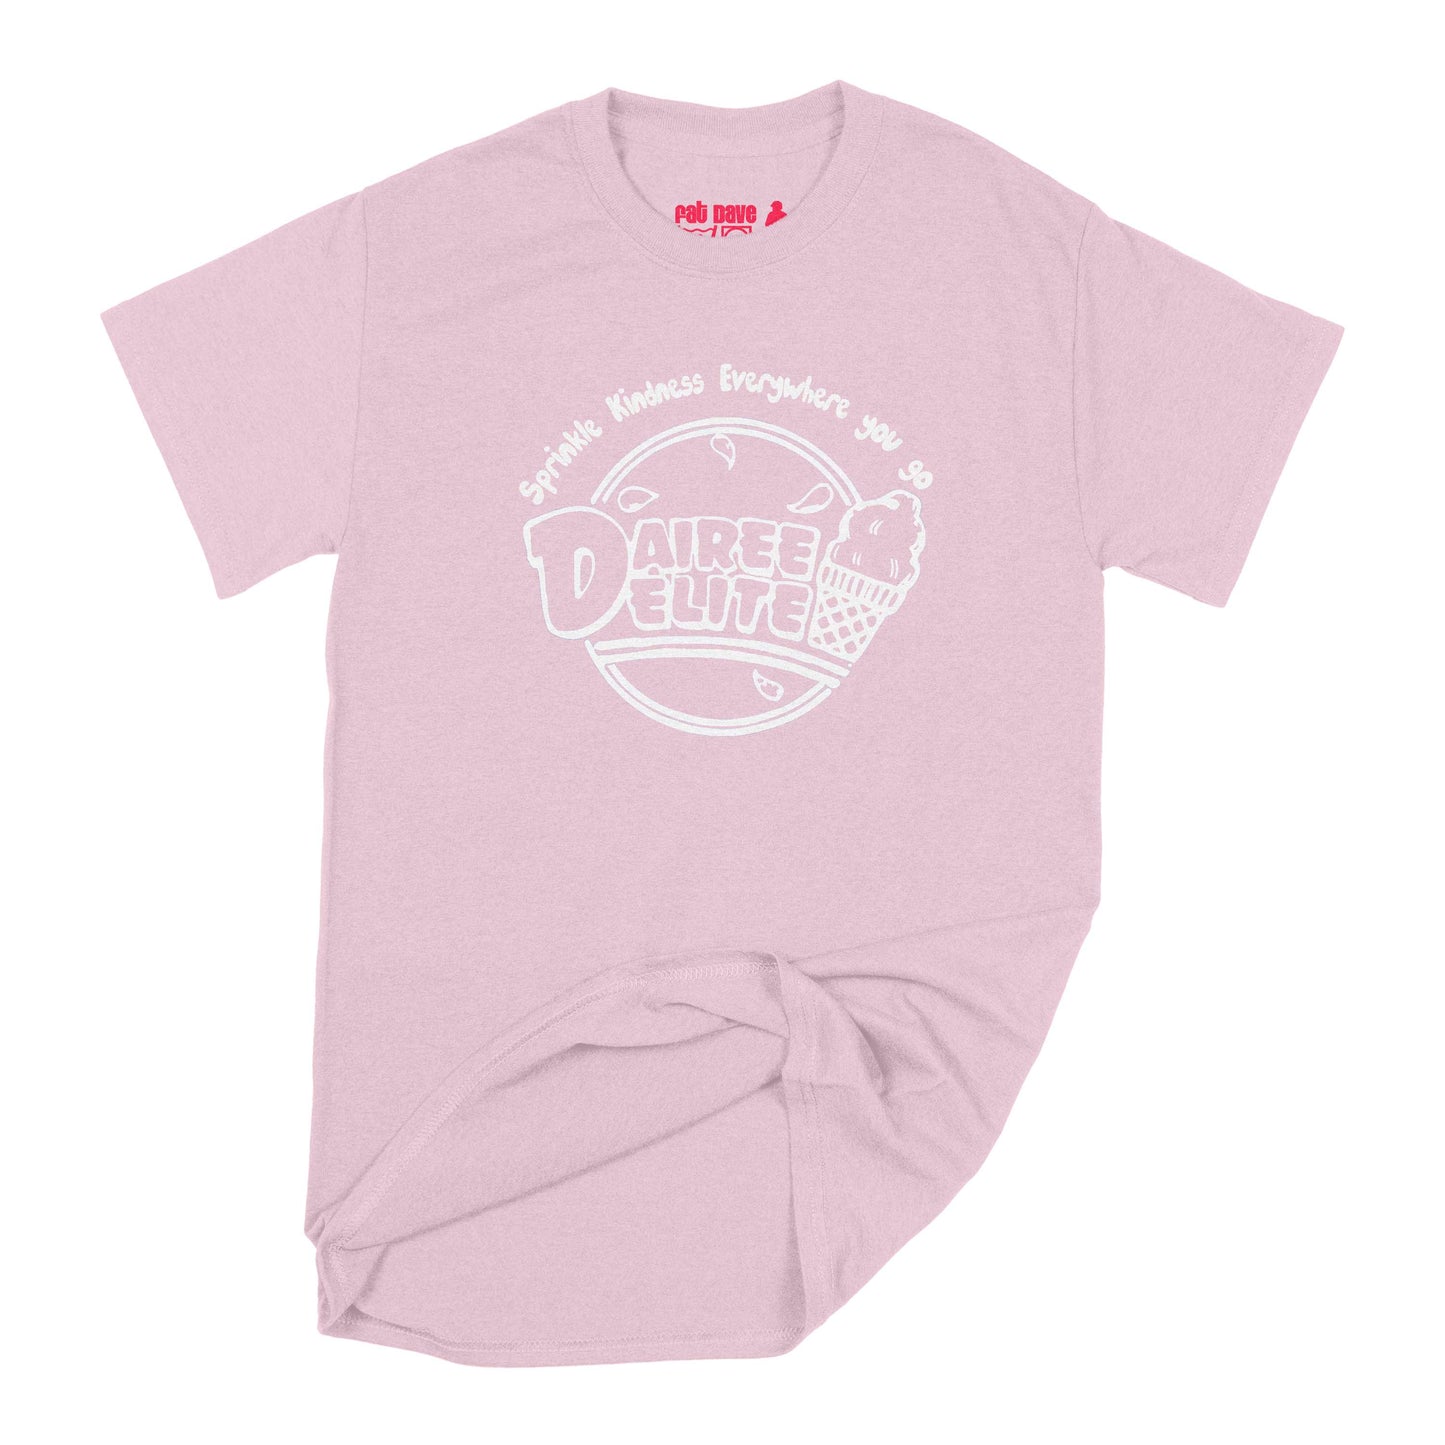 Dairee Delite 70th Anniversary Sprinkle Kindness T-Shirt Small Light Pink